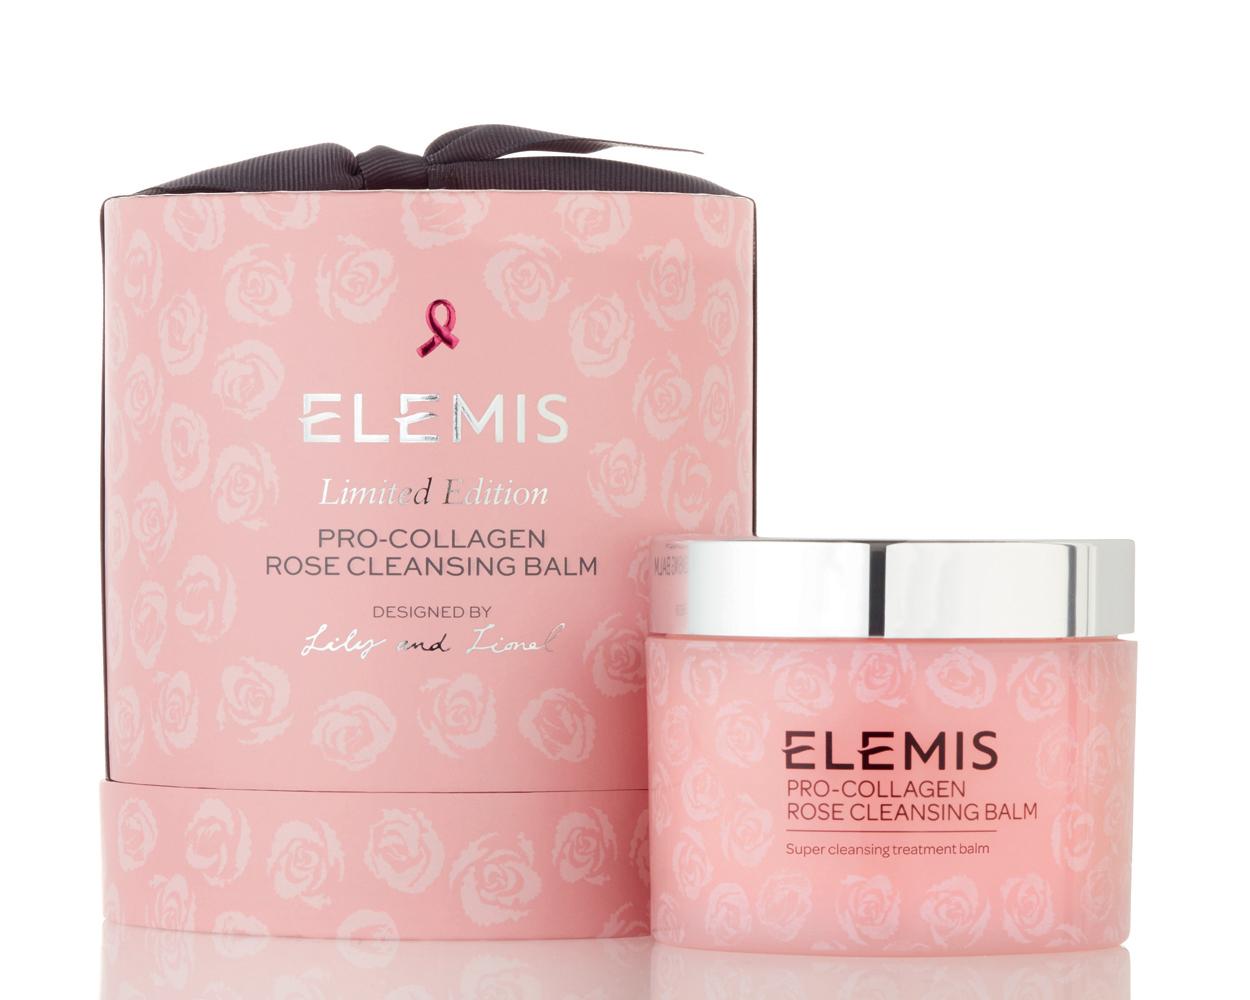 Elemis has reformulated its Pro-Collagen Cleansing Balm to include more than 17 different varieties of rose extract / 